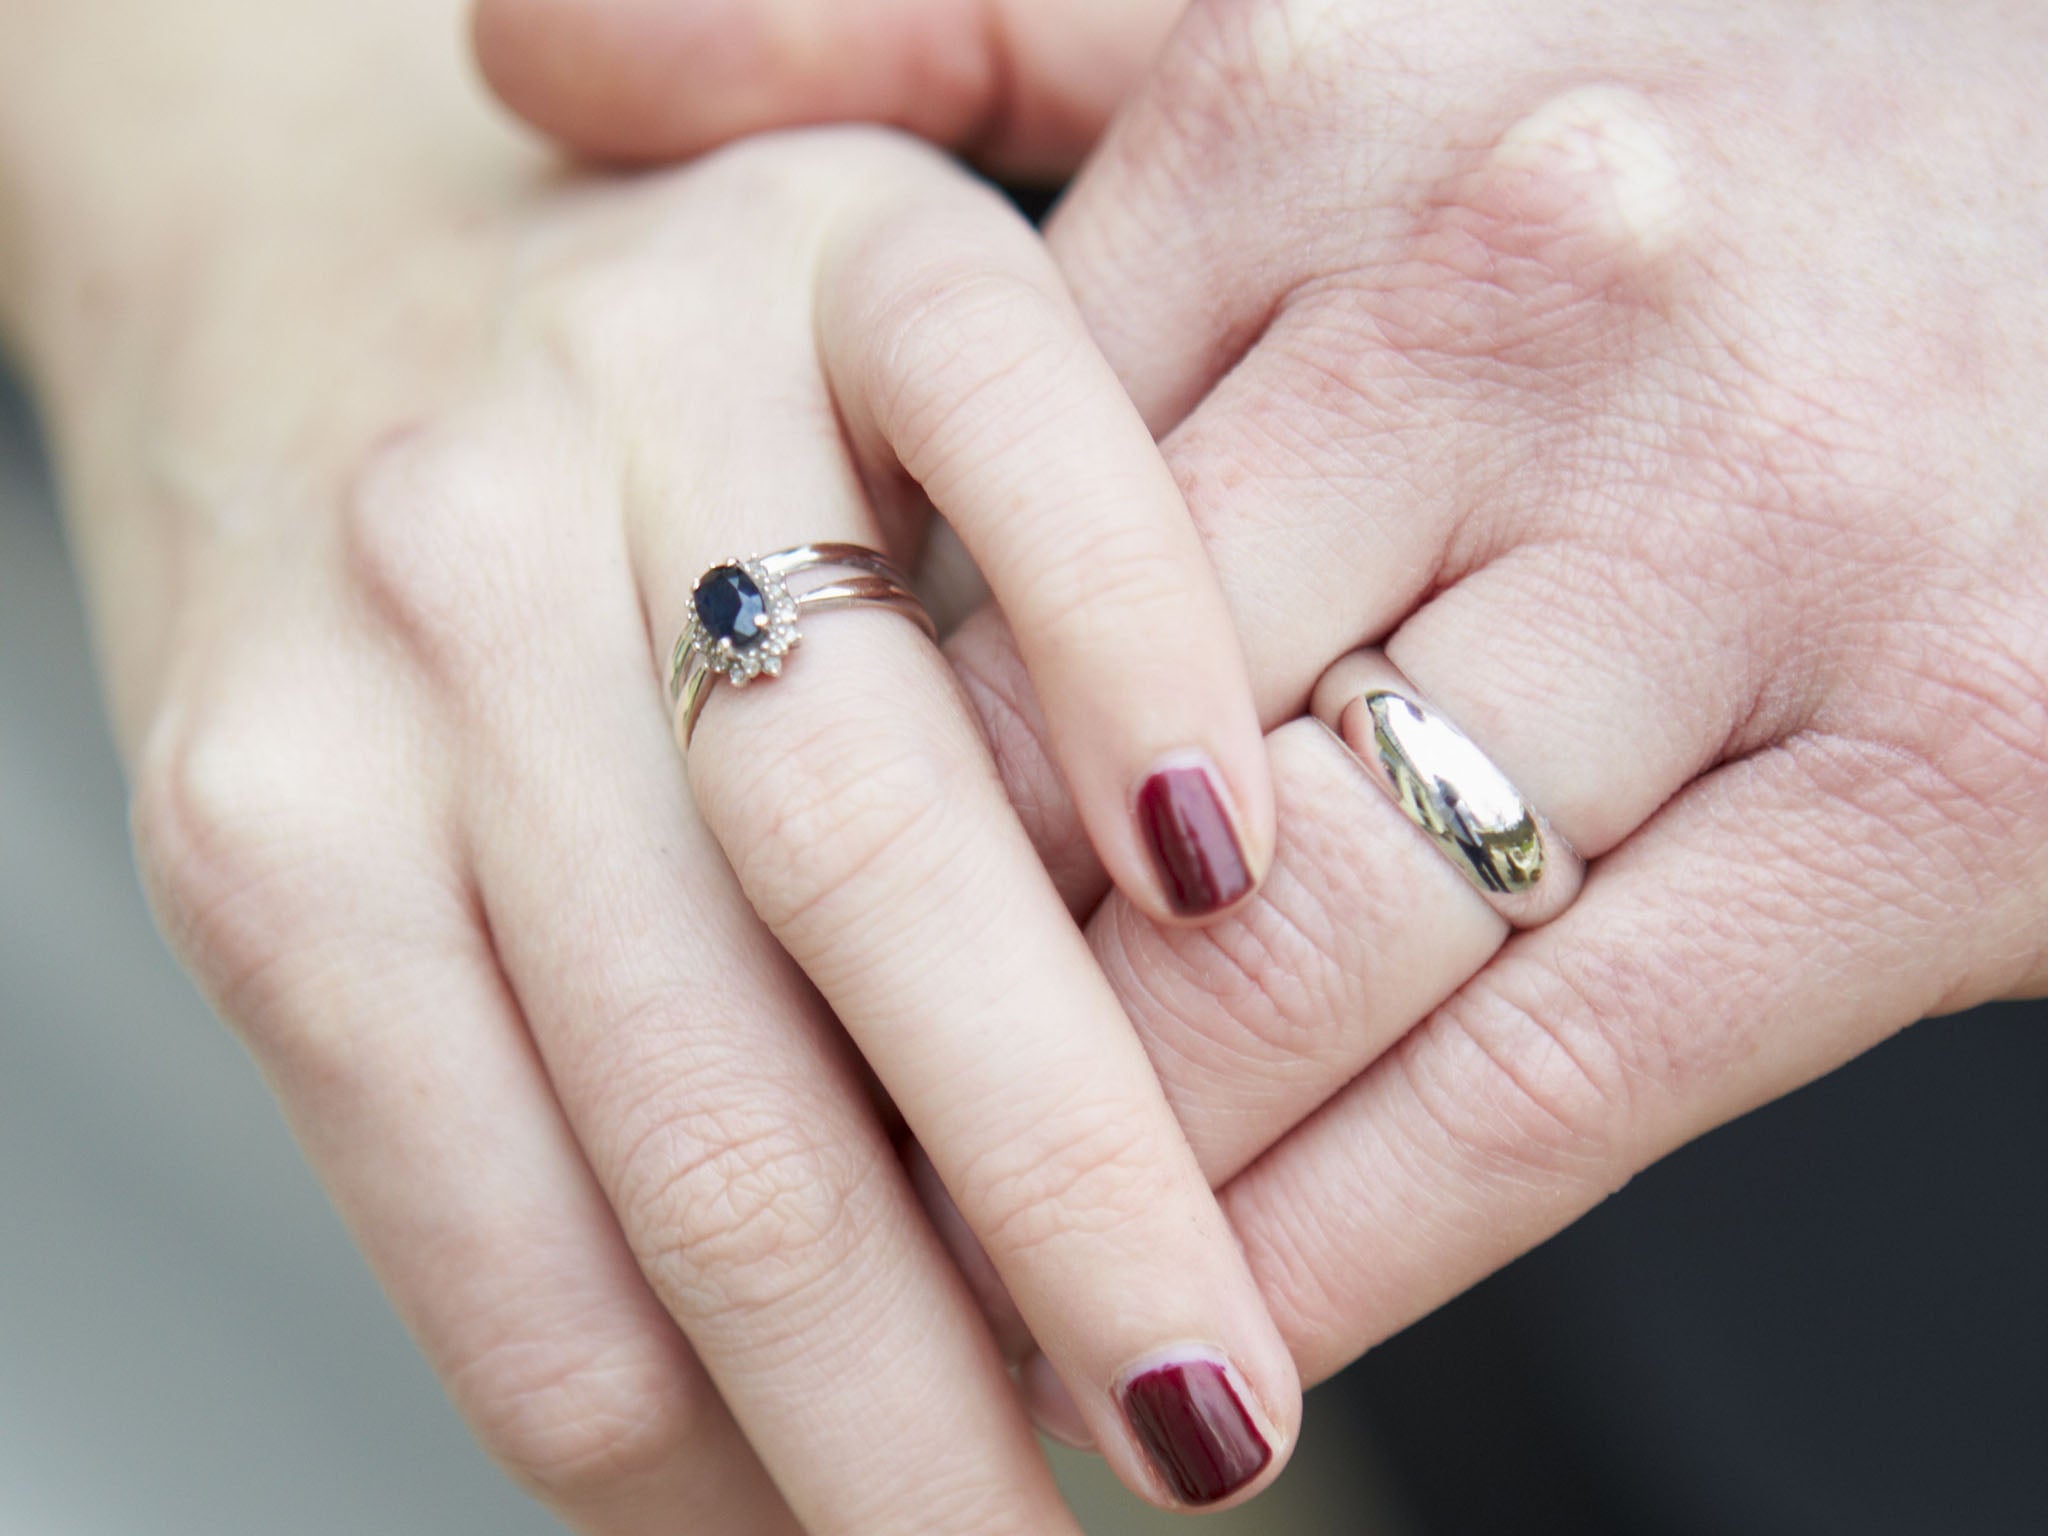 Researchers found the perfect age for marriage was between the ages of 28 and 32